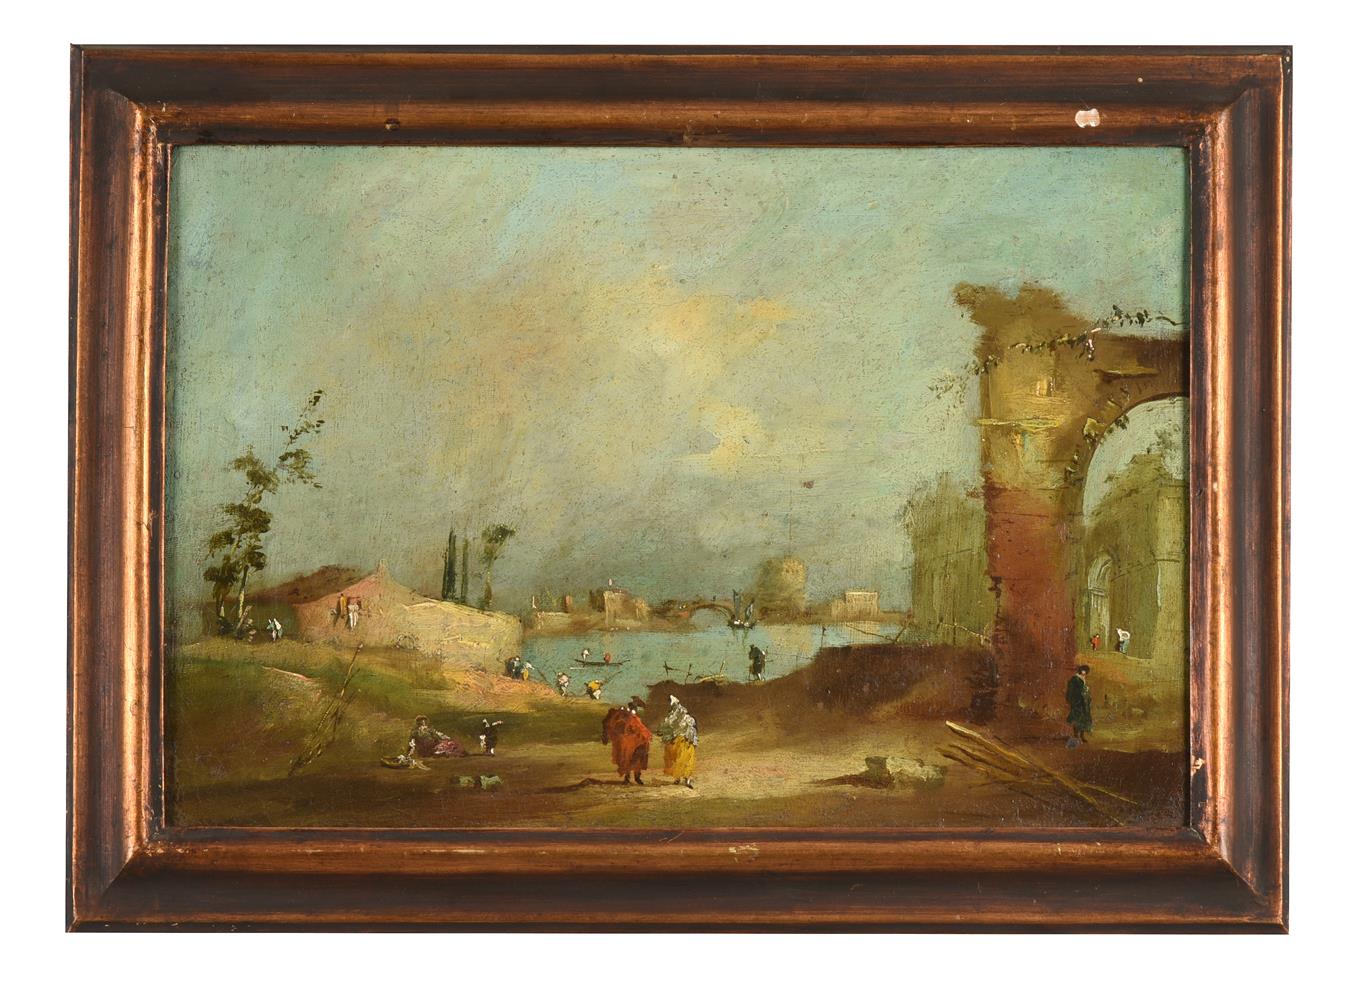 MANNER OF FRANCESCO GUARDI, THREE CAPRICCIO LANDSCAPES WITH FIGURES AND RUINS - Image 3 of 3